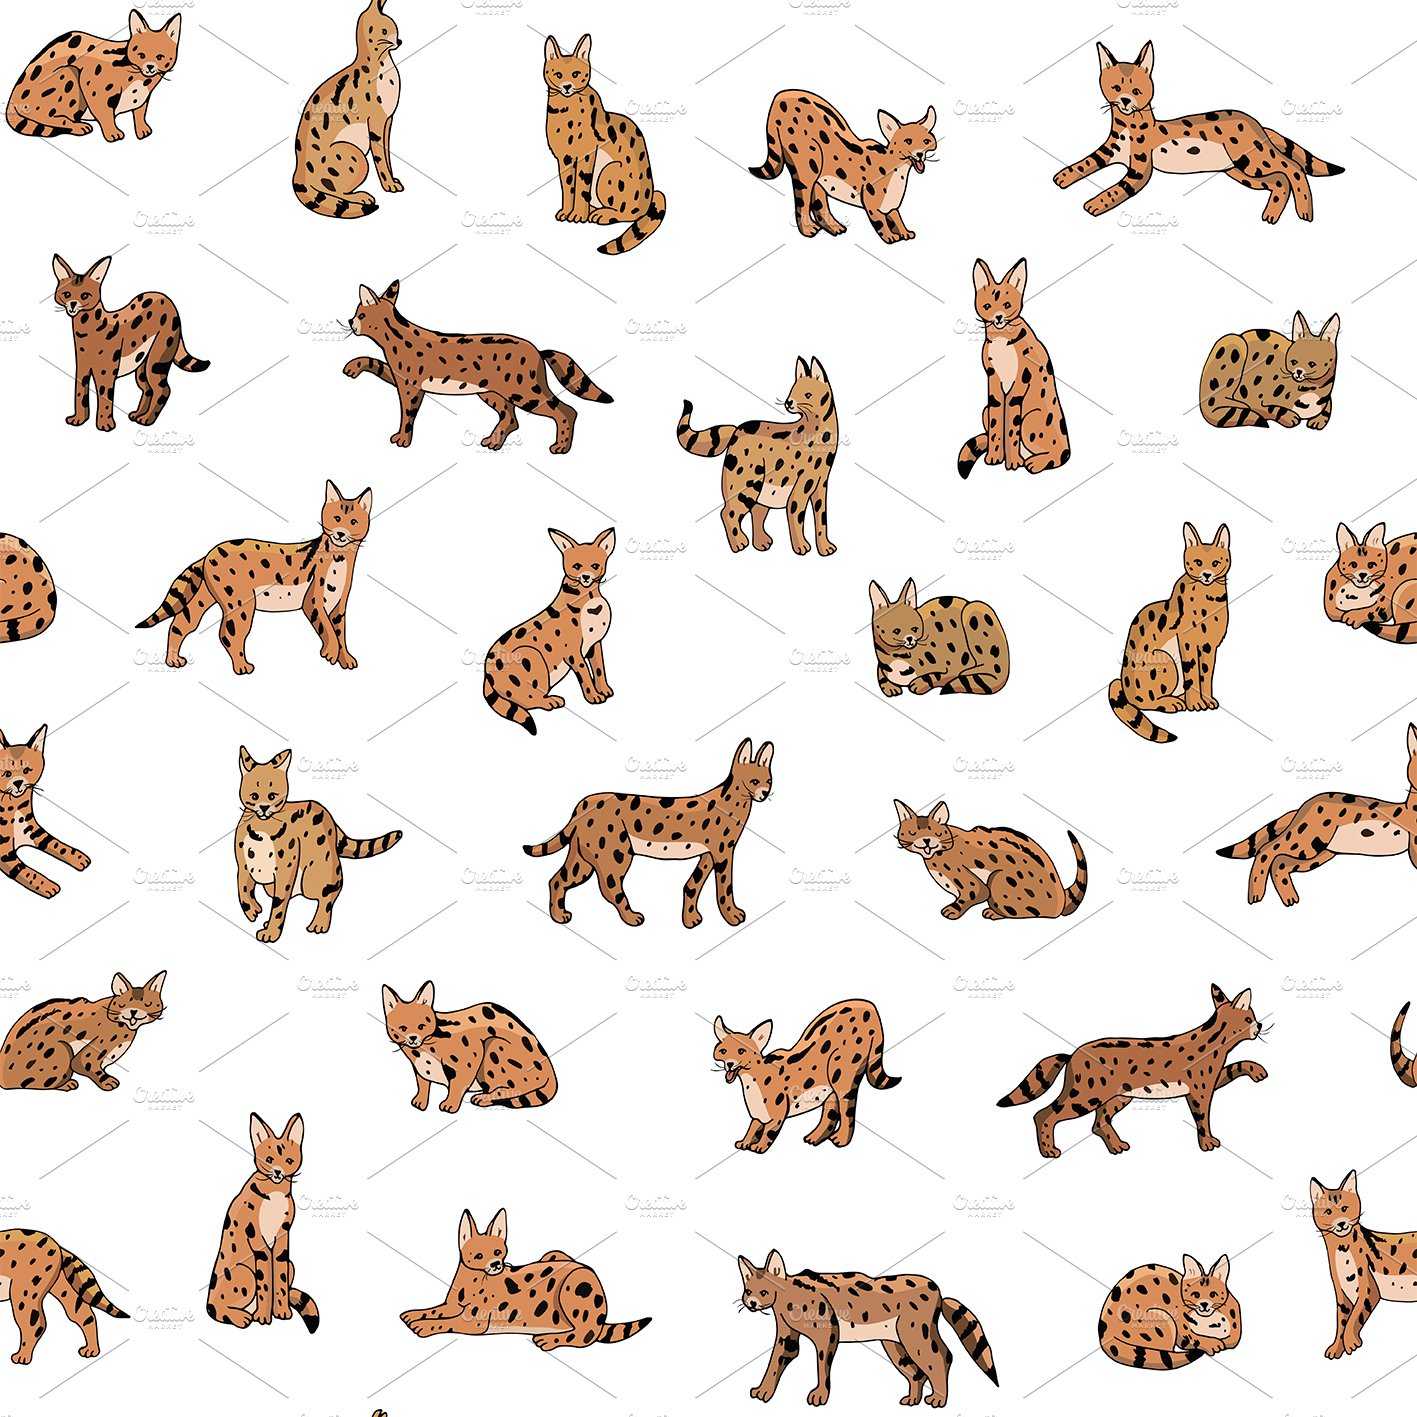 So cute servals collection.